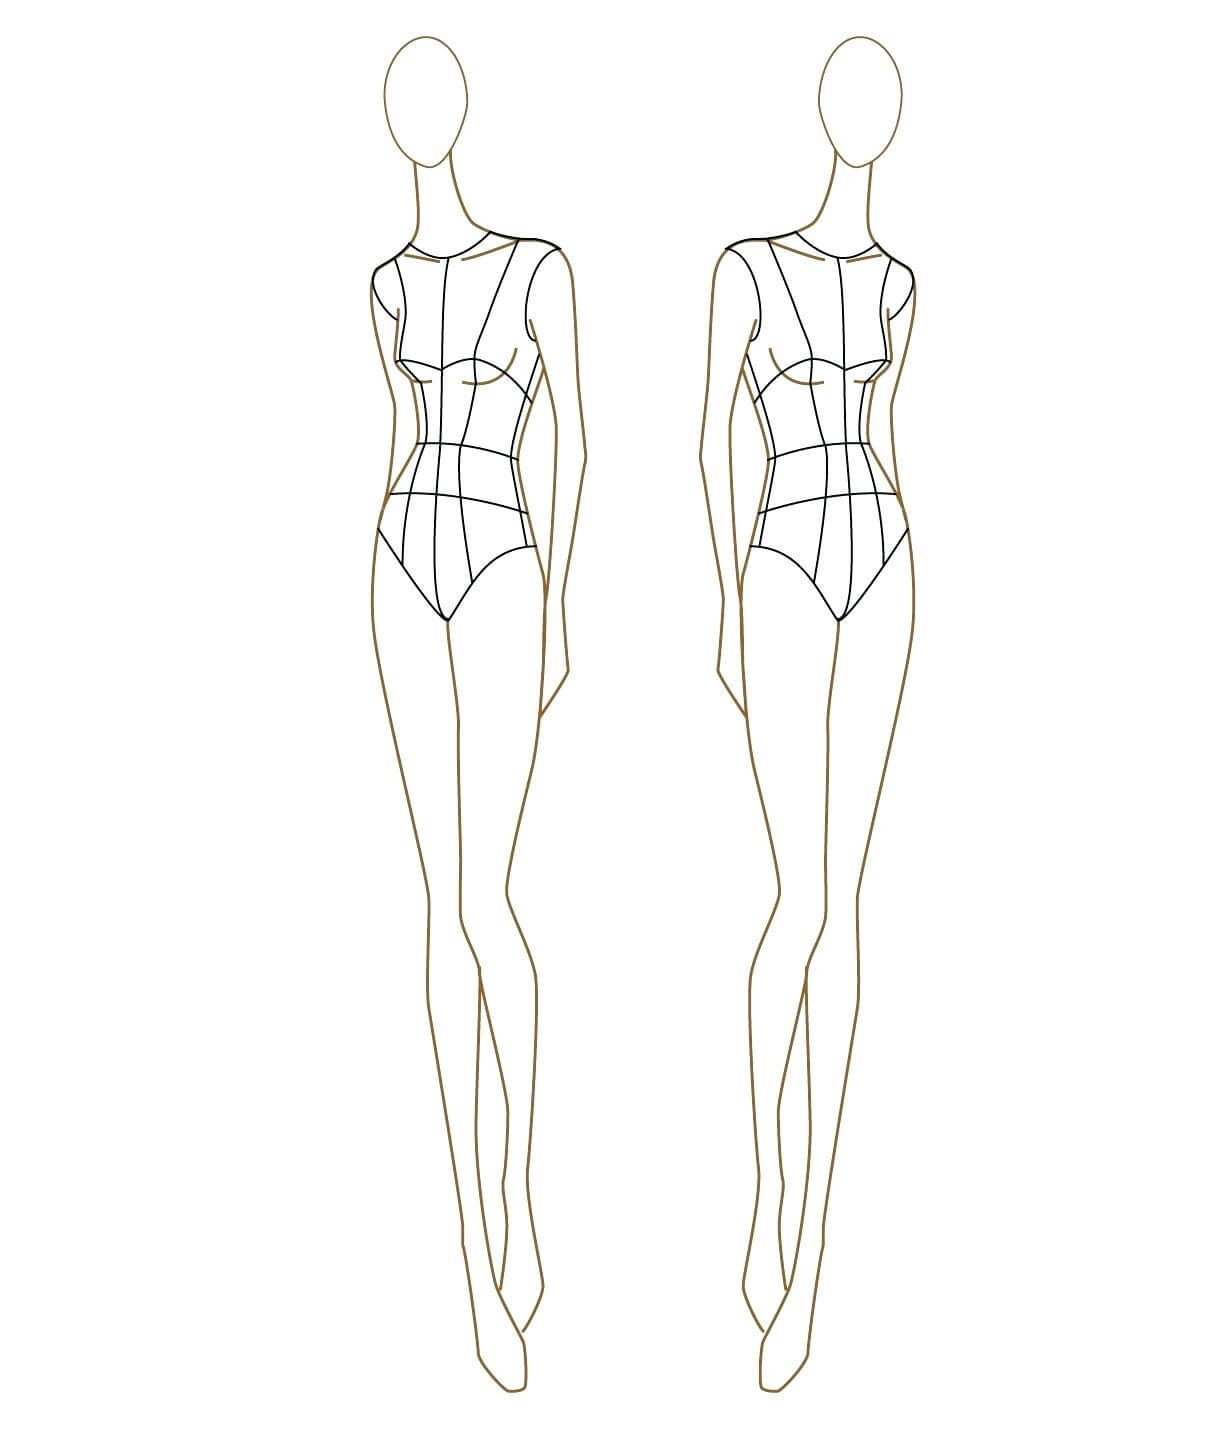 Body Model Sketch At Paintingvalley | Explore Collection Regarding Blank Model Sketch Template